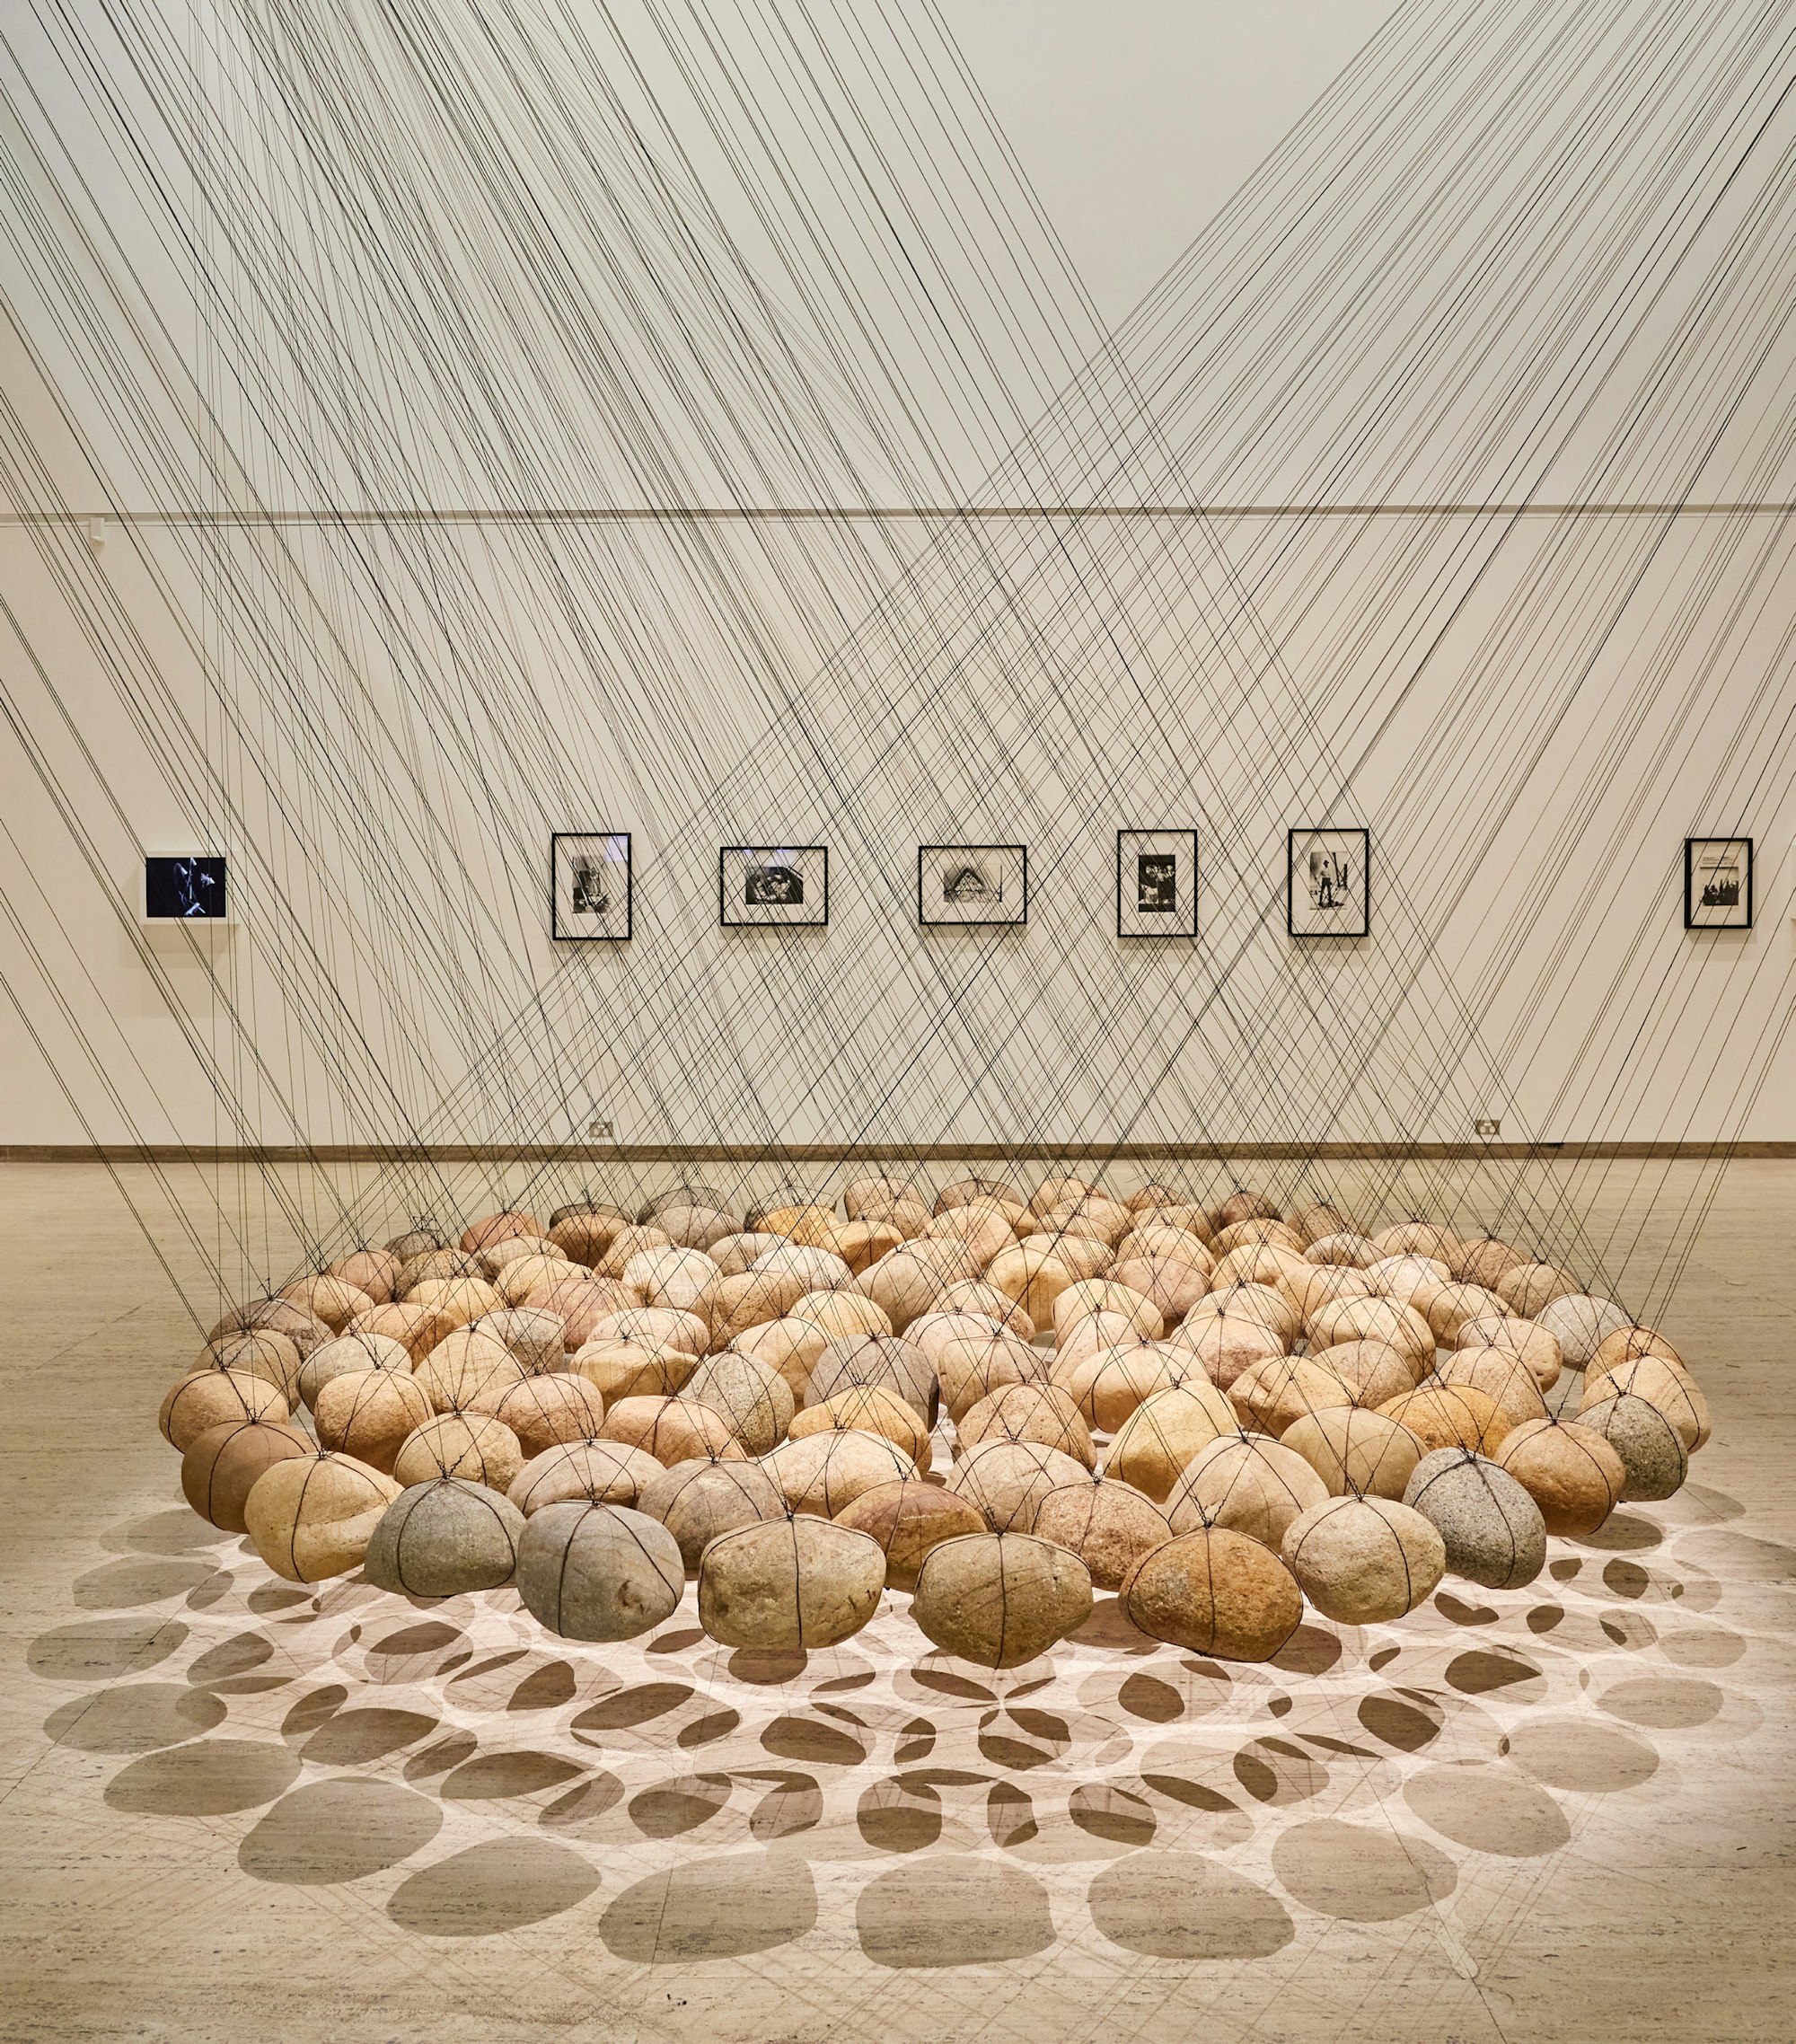 Ken Unsworth Suspended stone circle II 1974—77 1988, 103 river stones, wire, 4000 cm diam, Art Gallery of New South Wales, purchased 1988 © Ken Unsworth